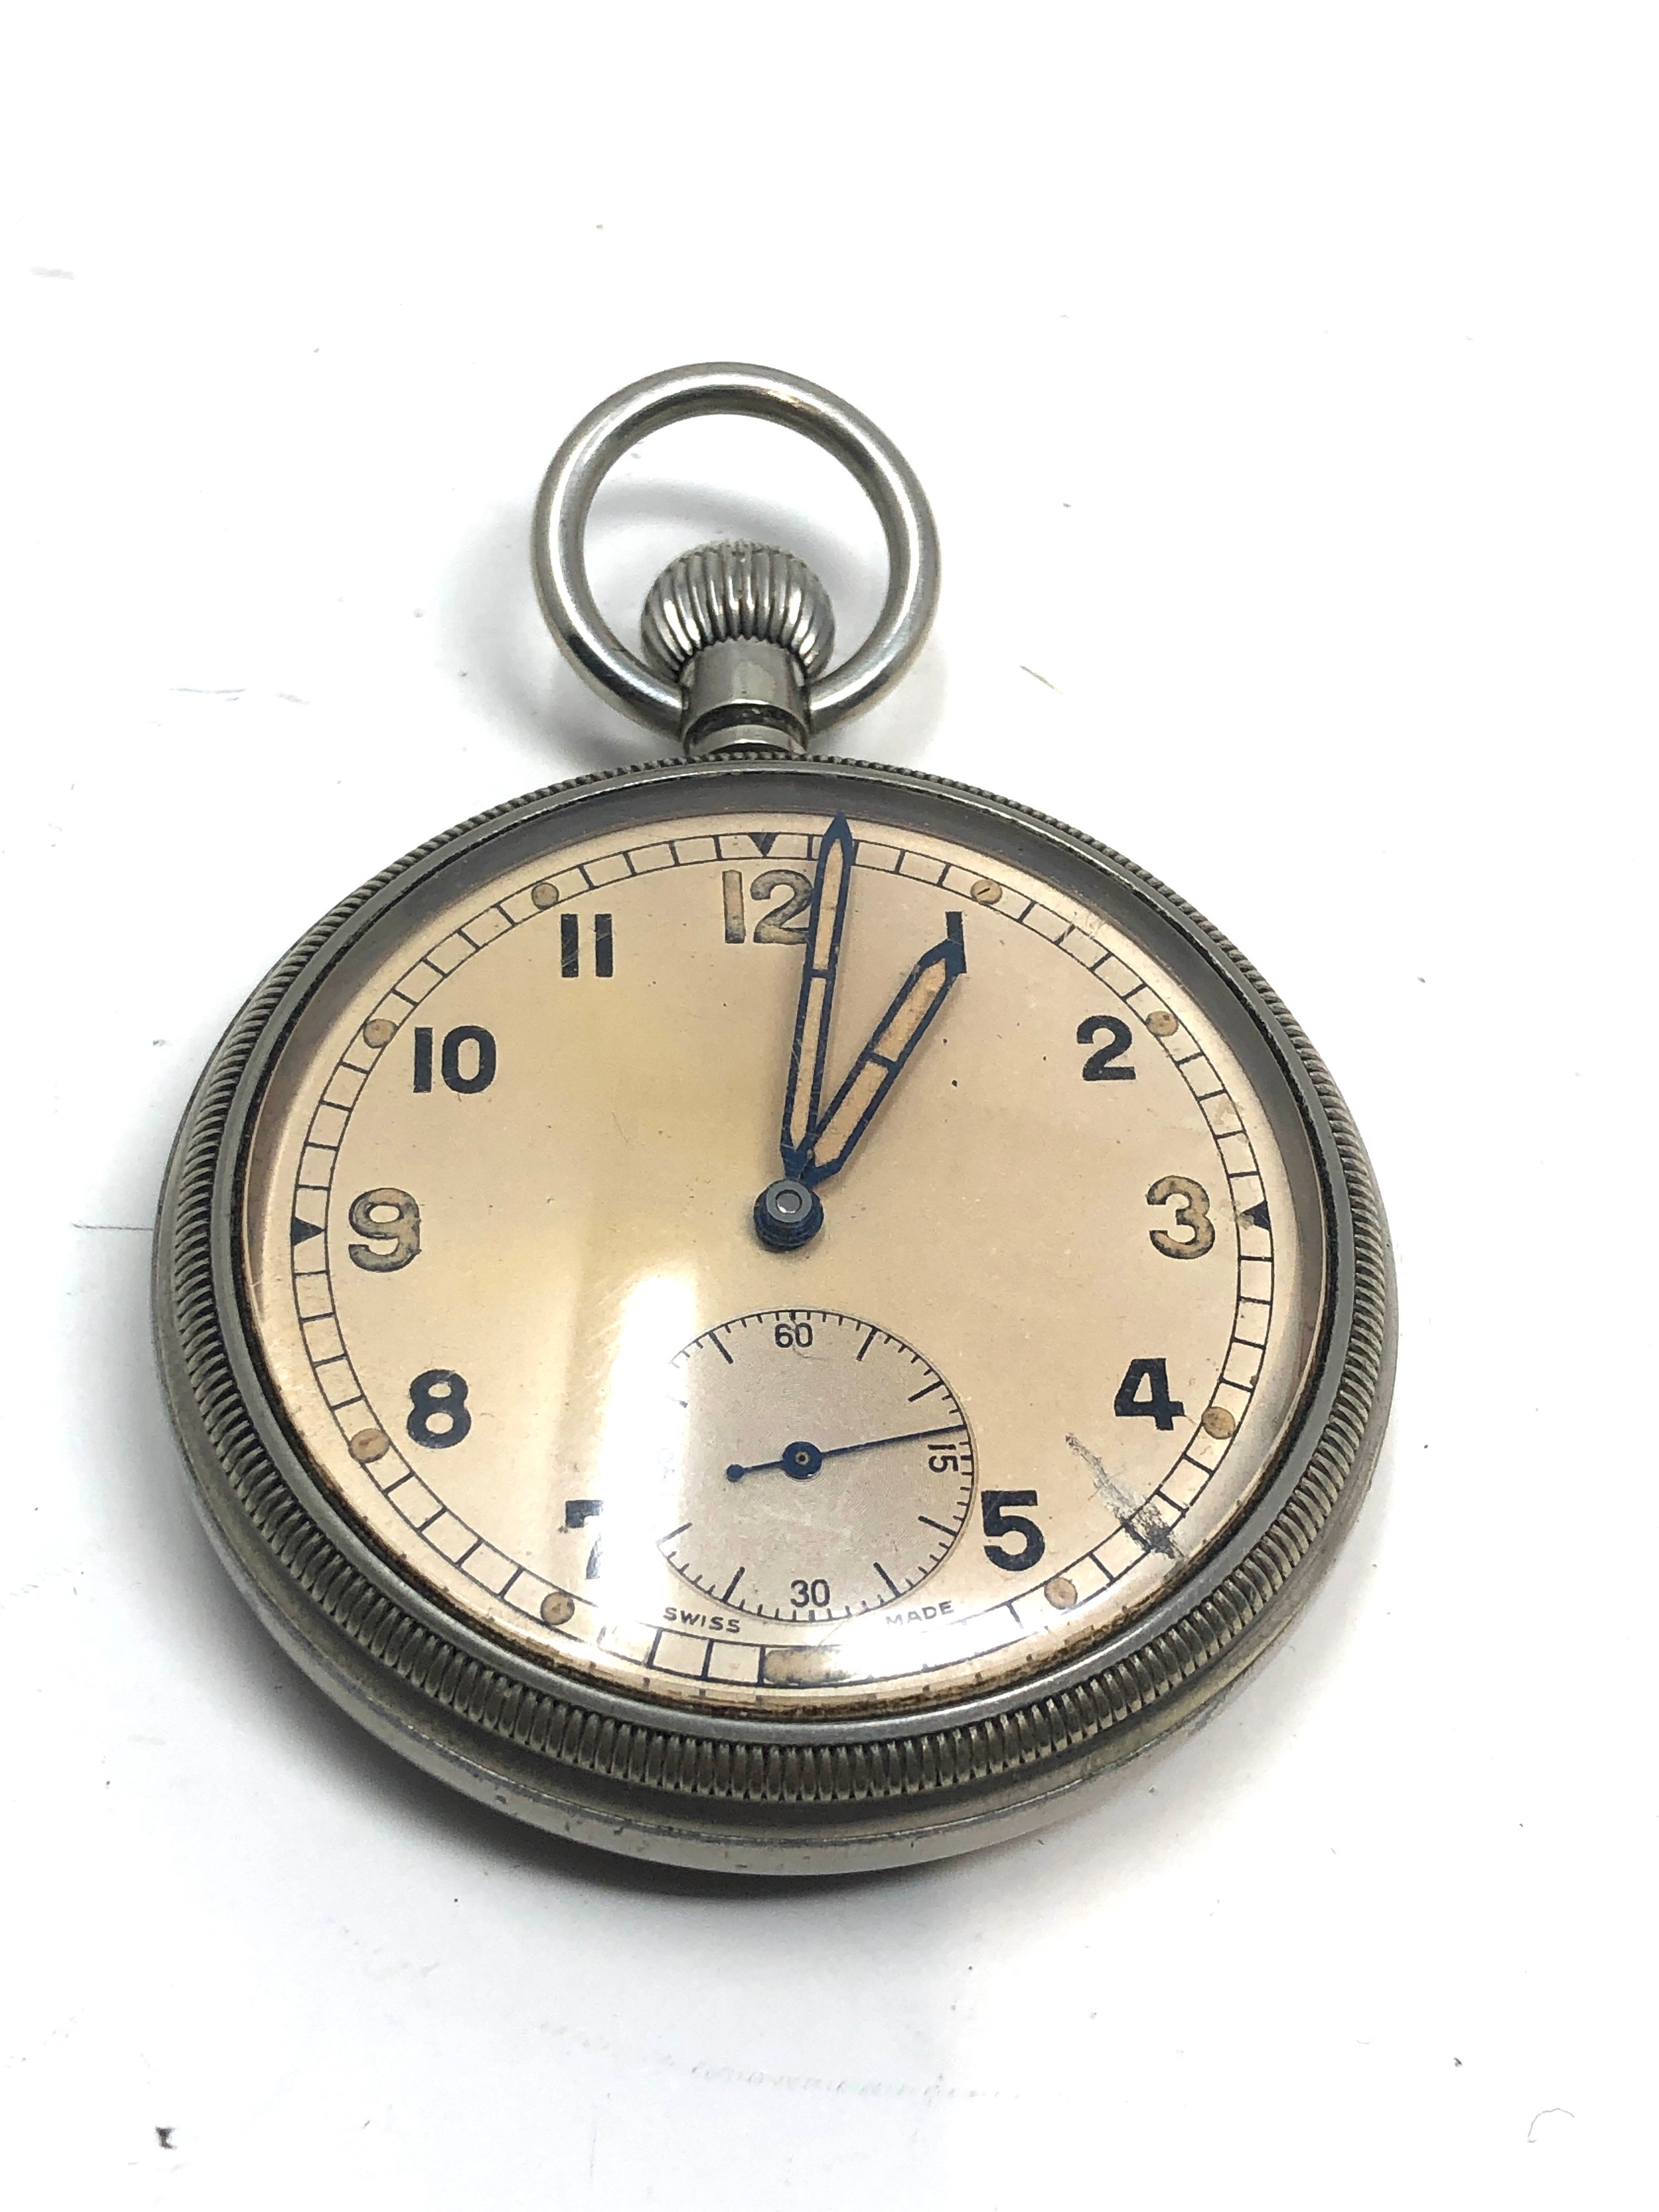 Military bravingtons london pocket watch in working order